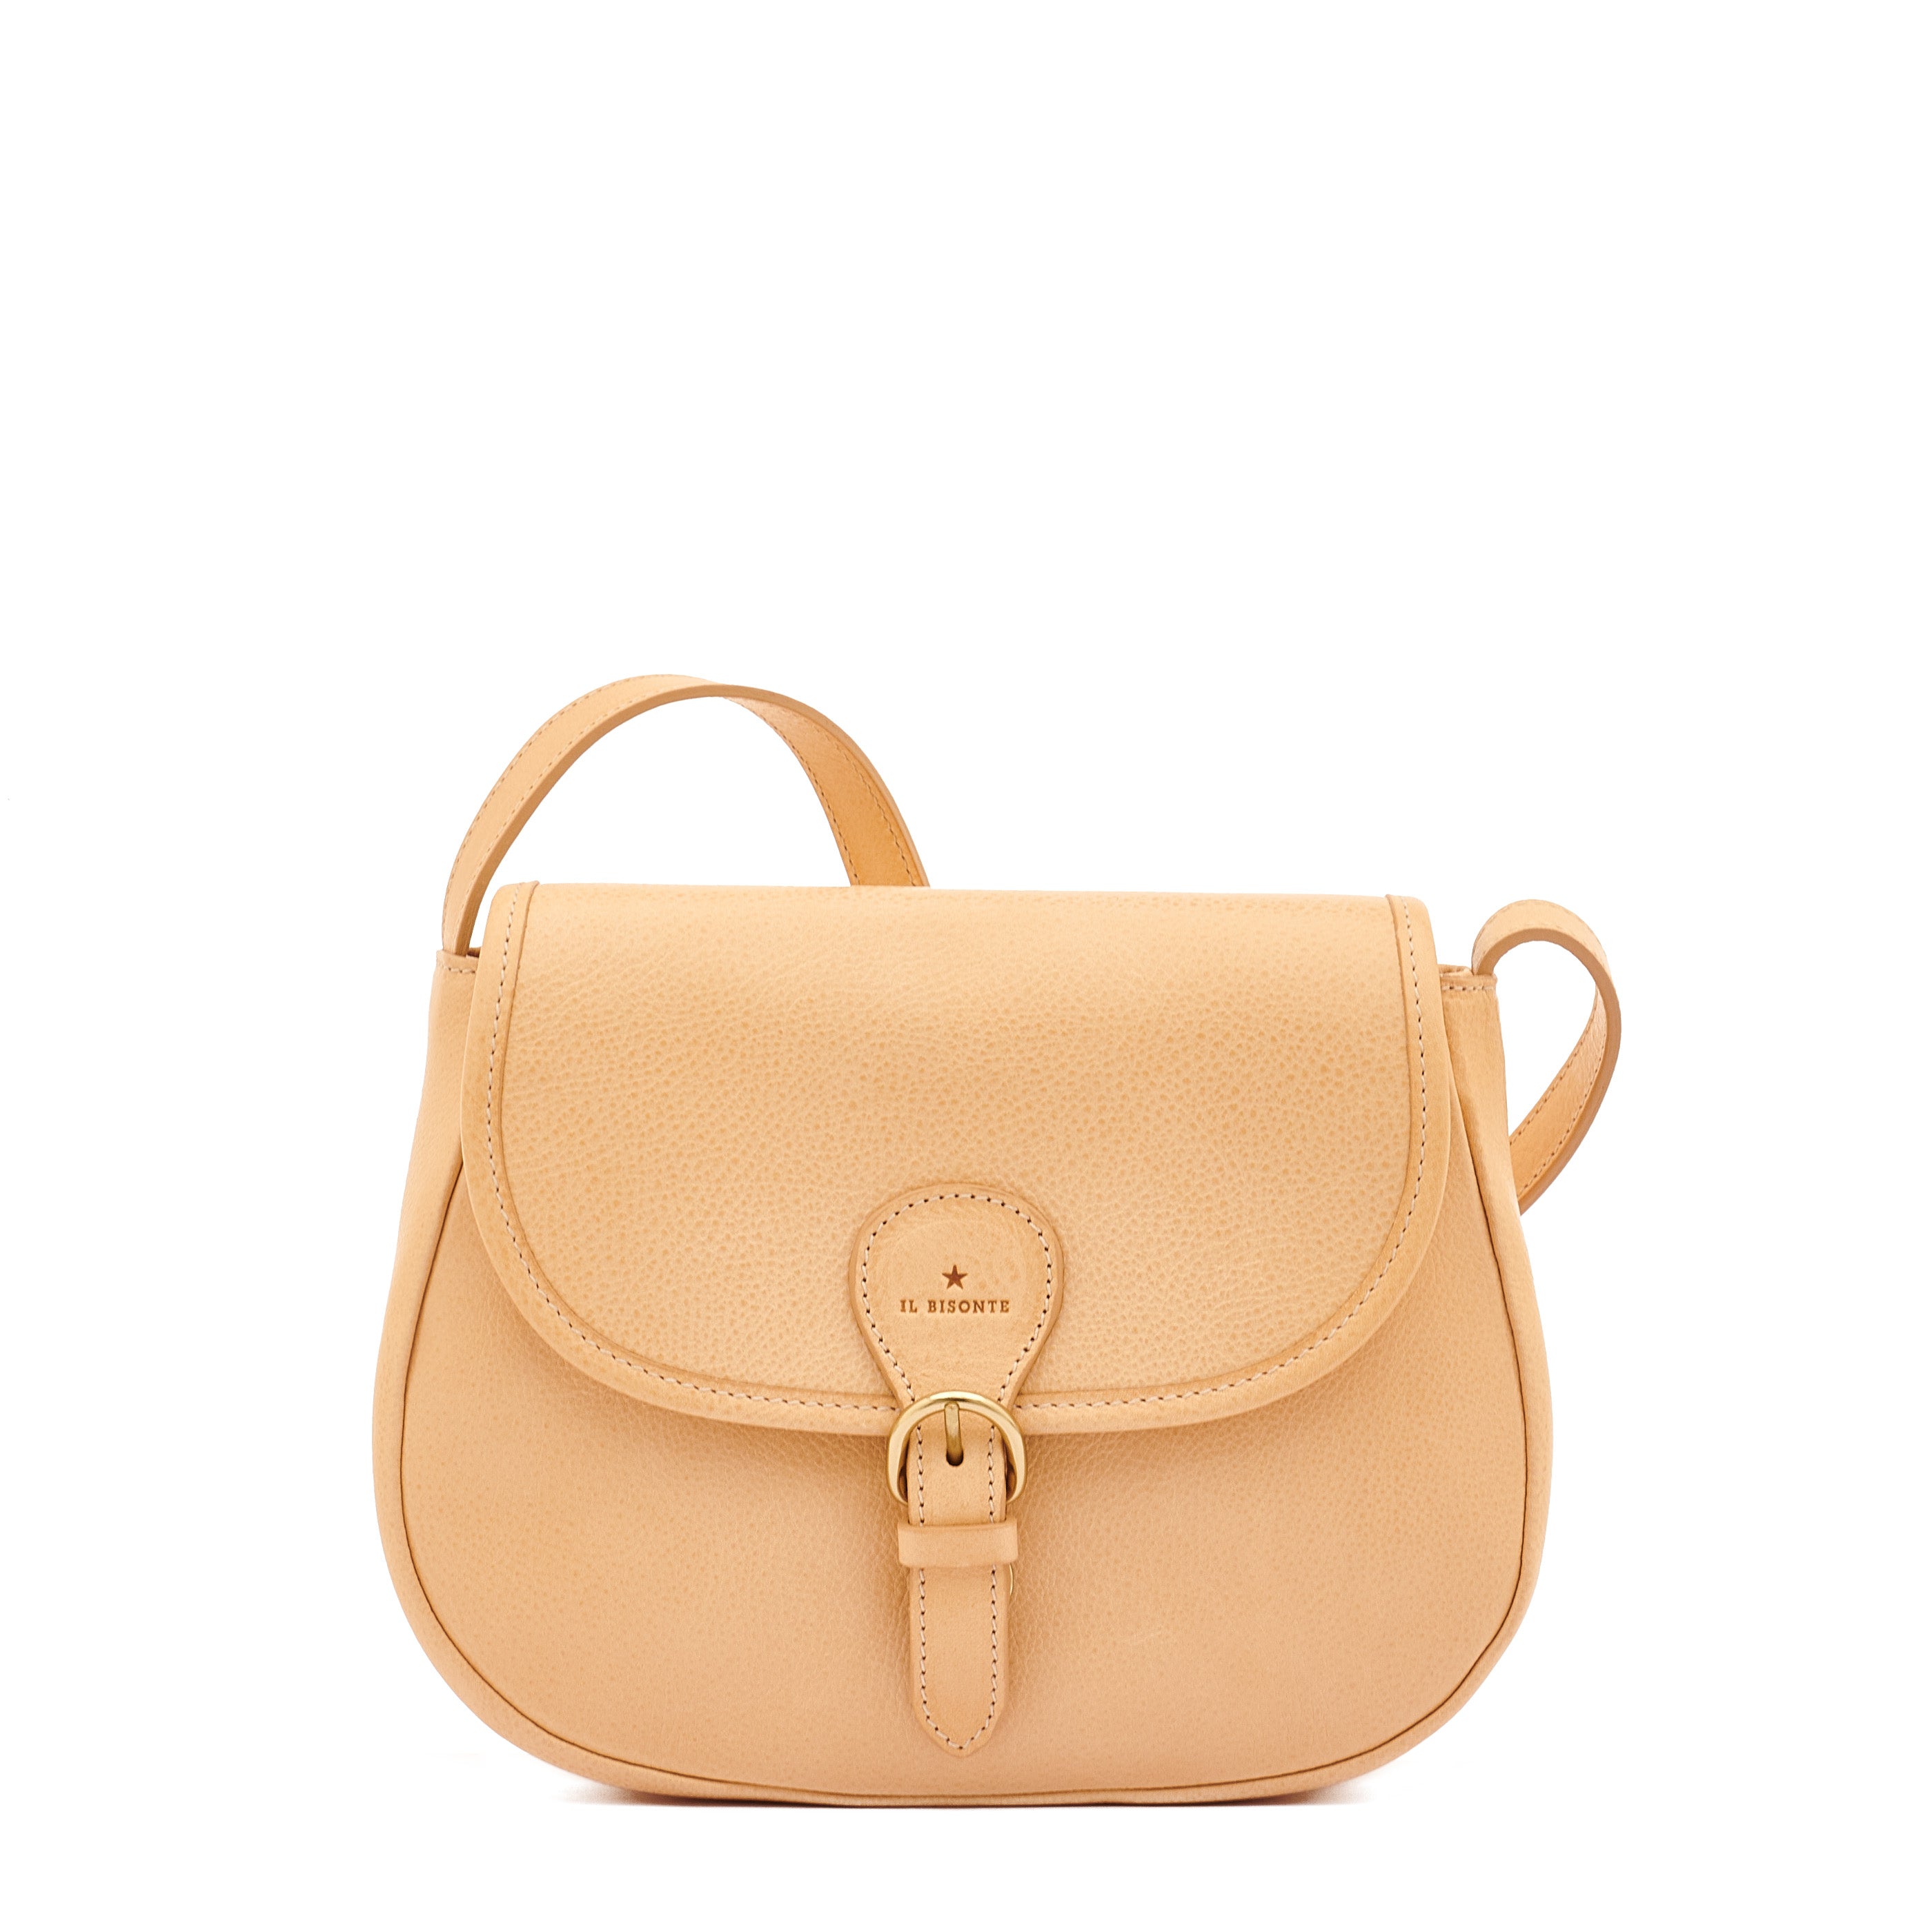 Novecento | Women's crossbody bag in leather color natural